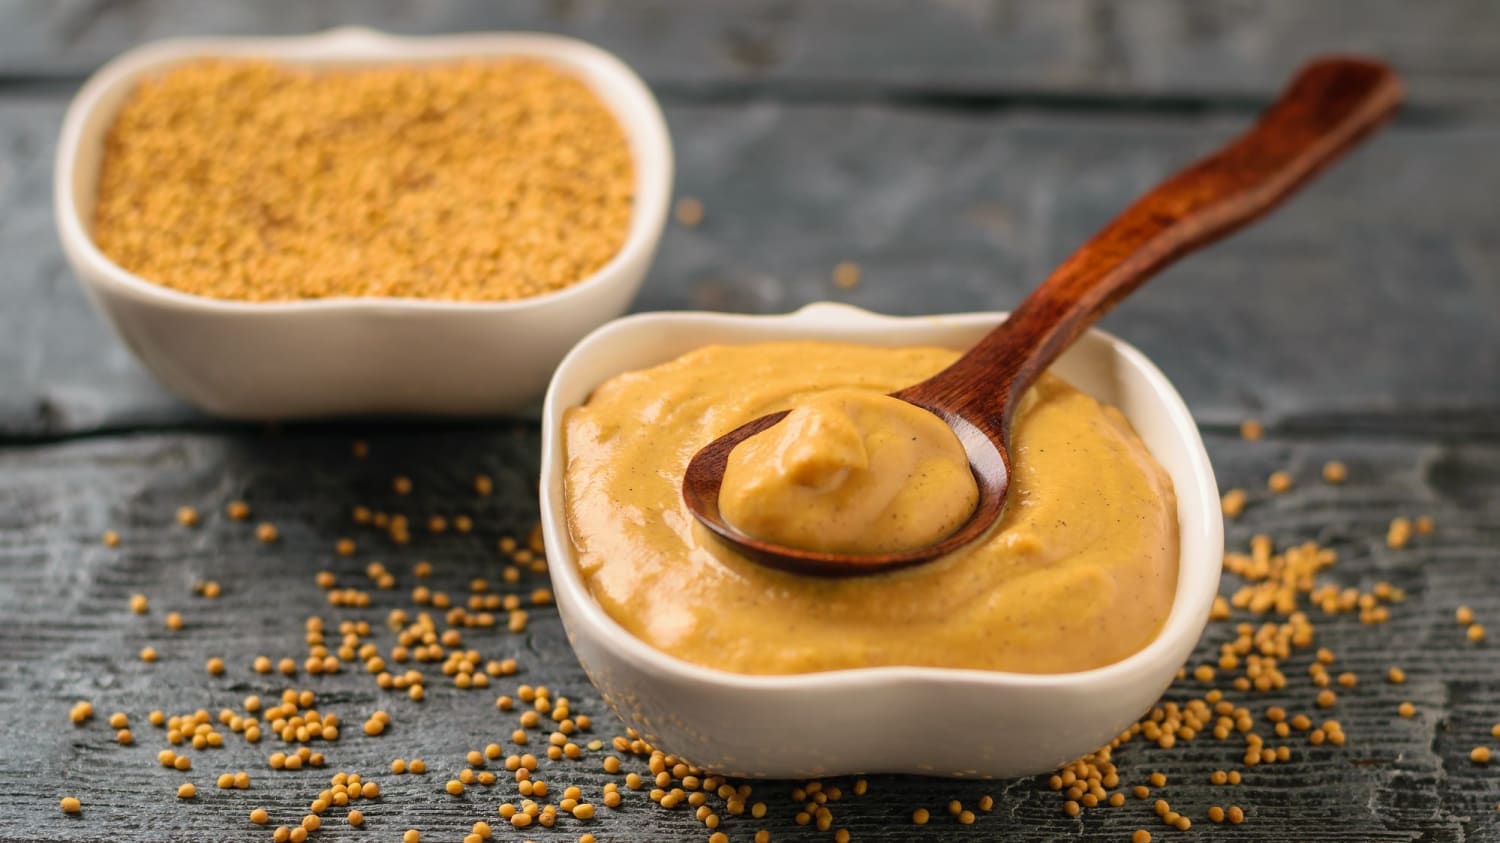 13 Spicy Facts About Mustard